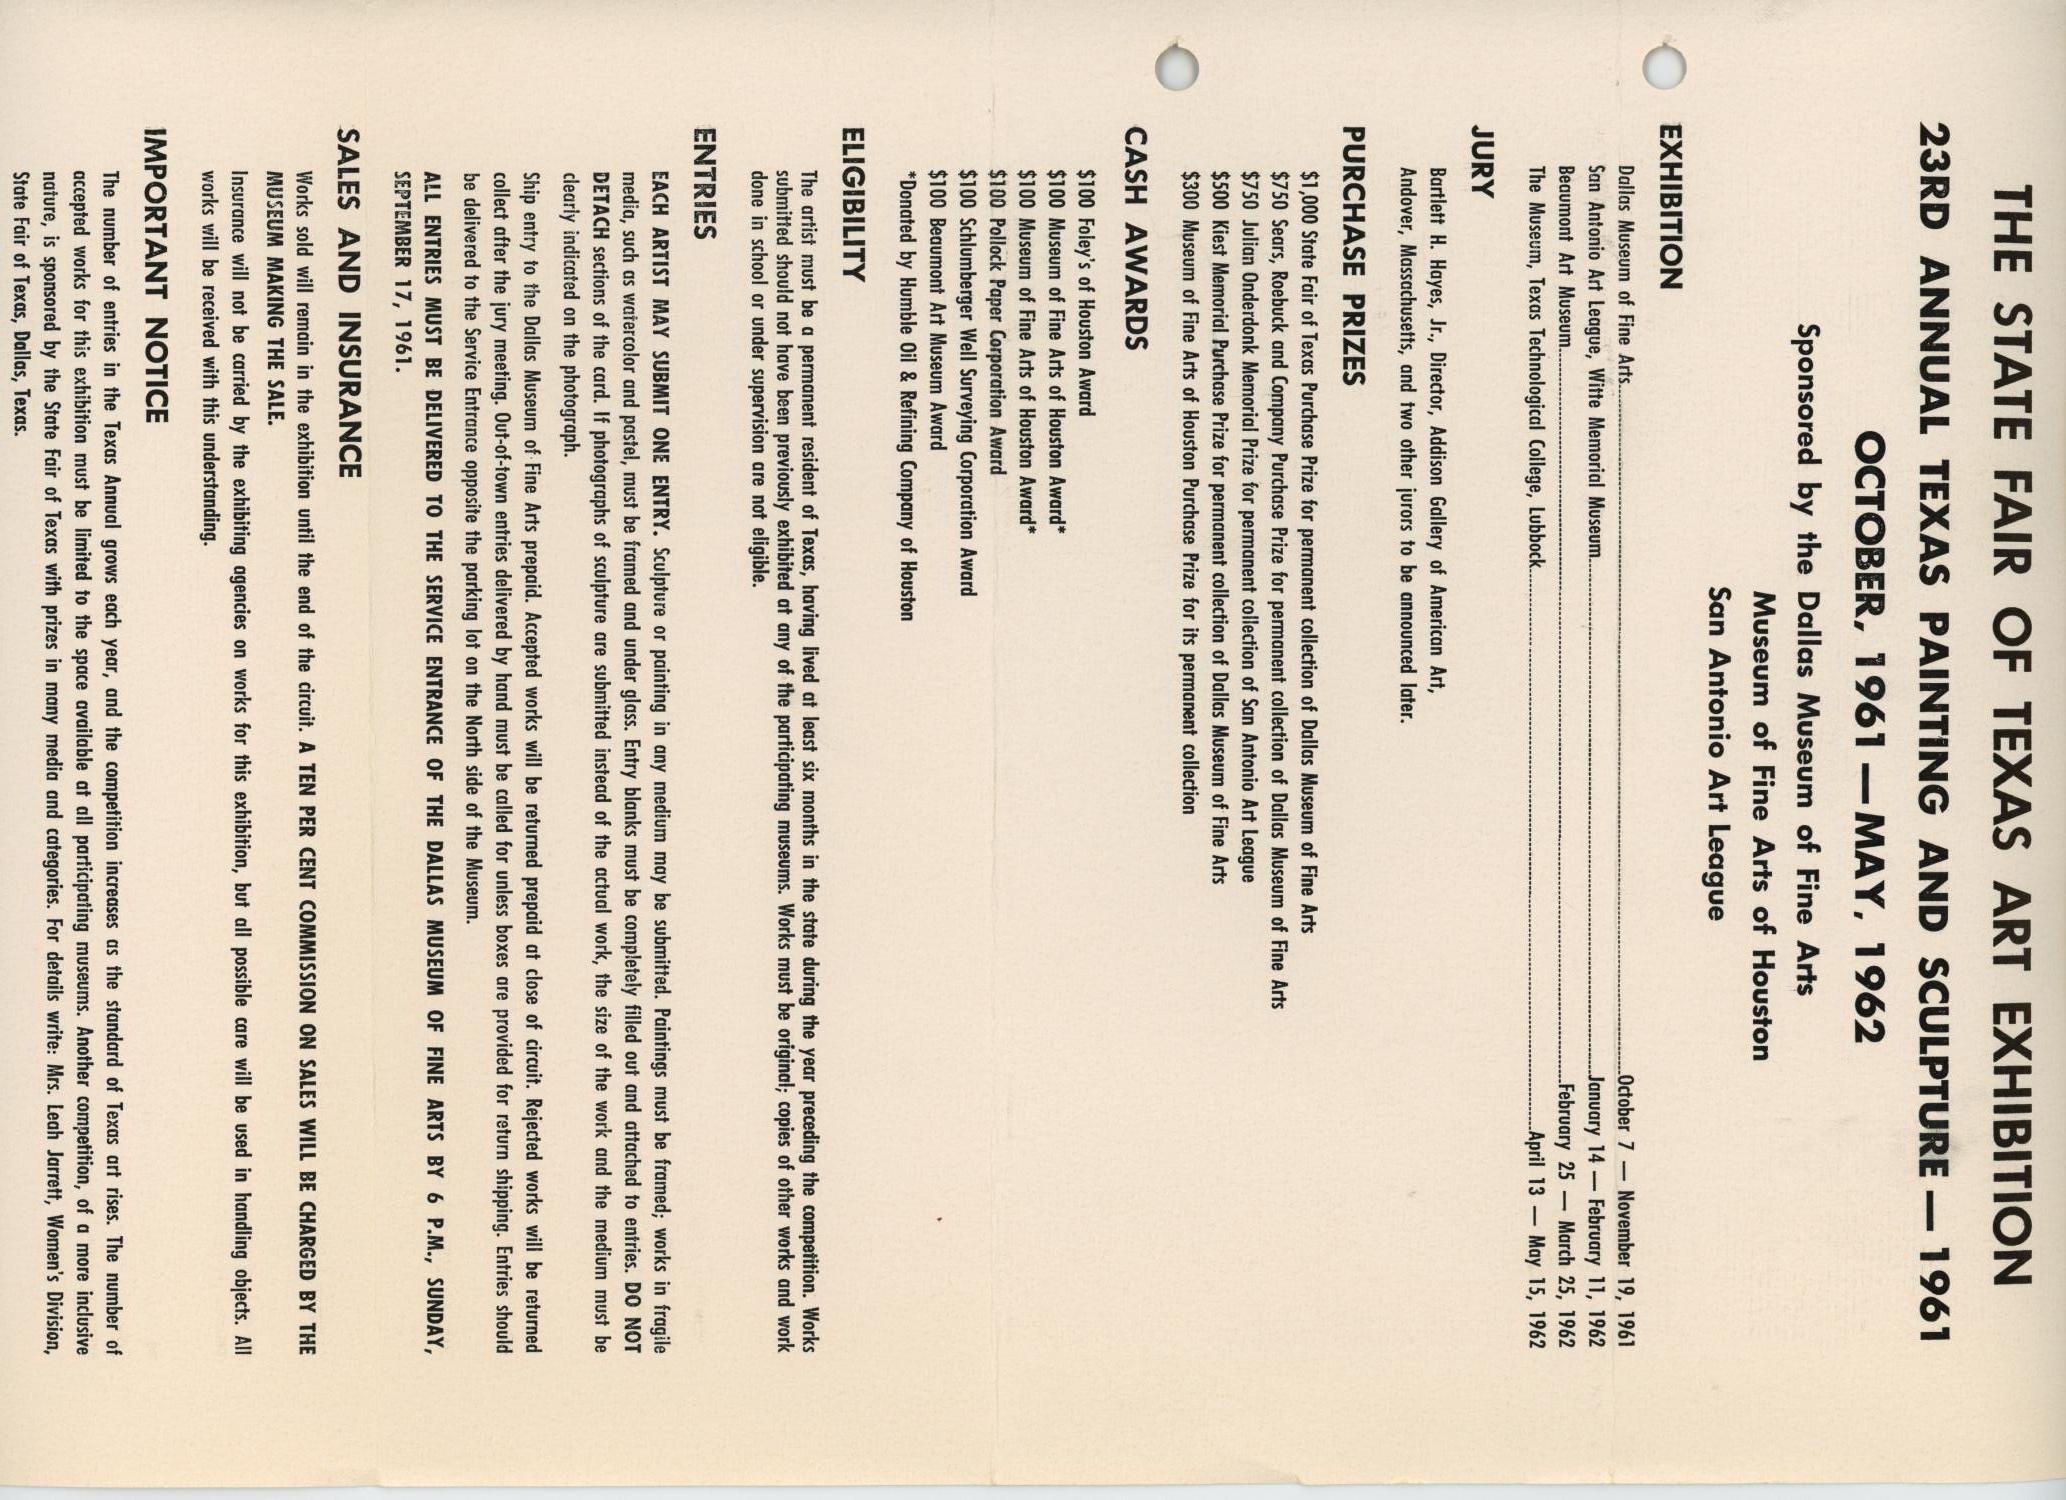 The State Fair of Texas Art Exhibition: 23rd Annual Texas Painting and Sculpture - 1961 [Fact Sheet]
                                                
                                                    [Sequence #]: 1 of 1
                                                